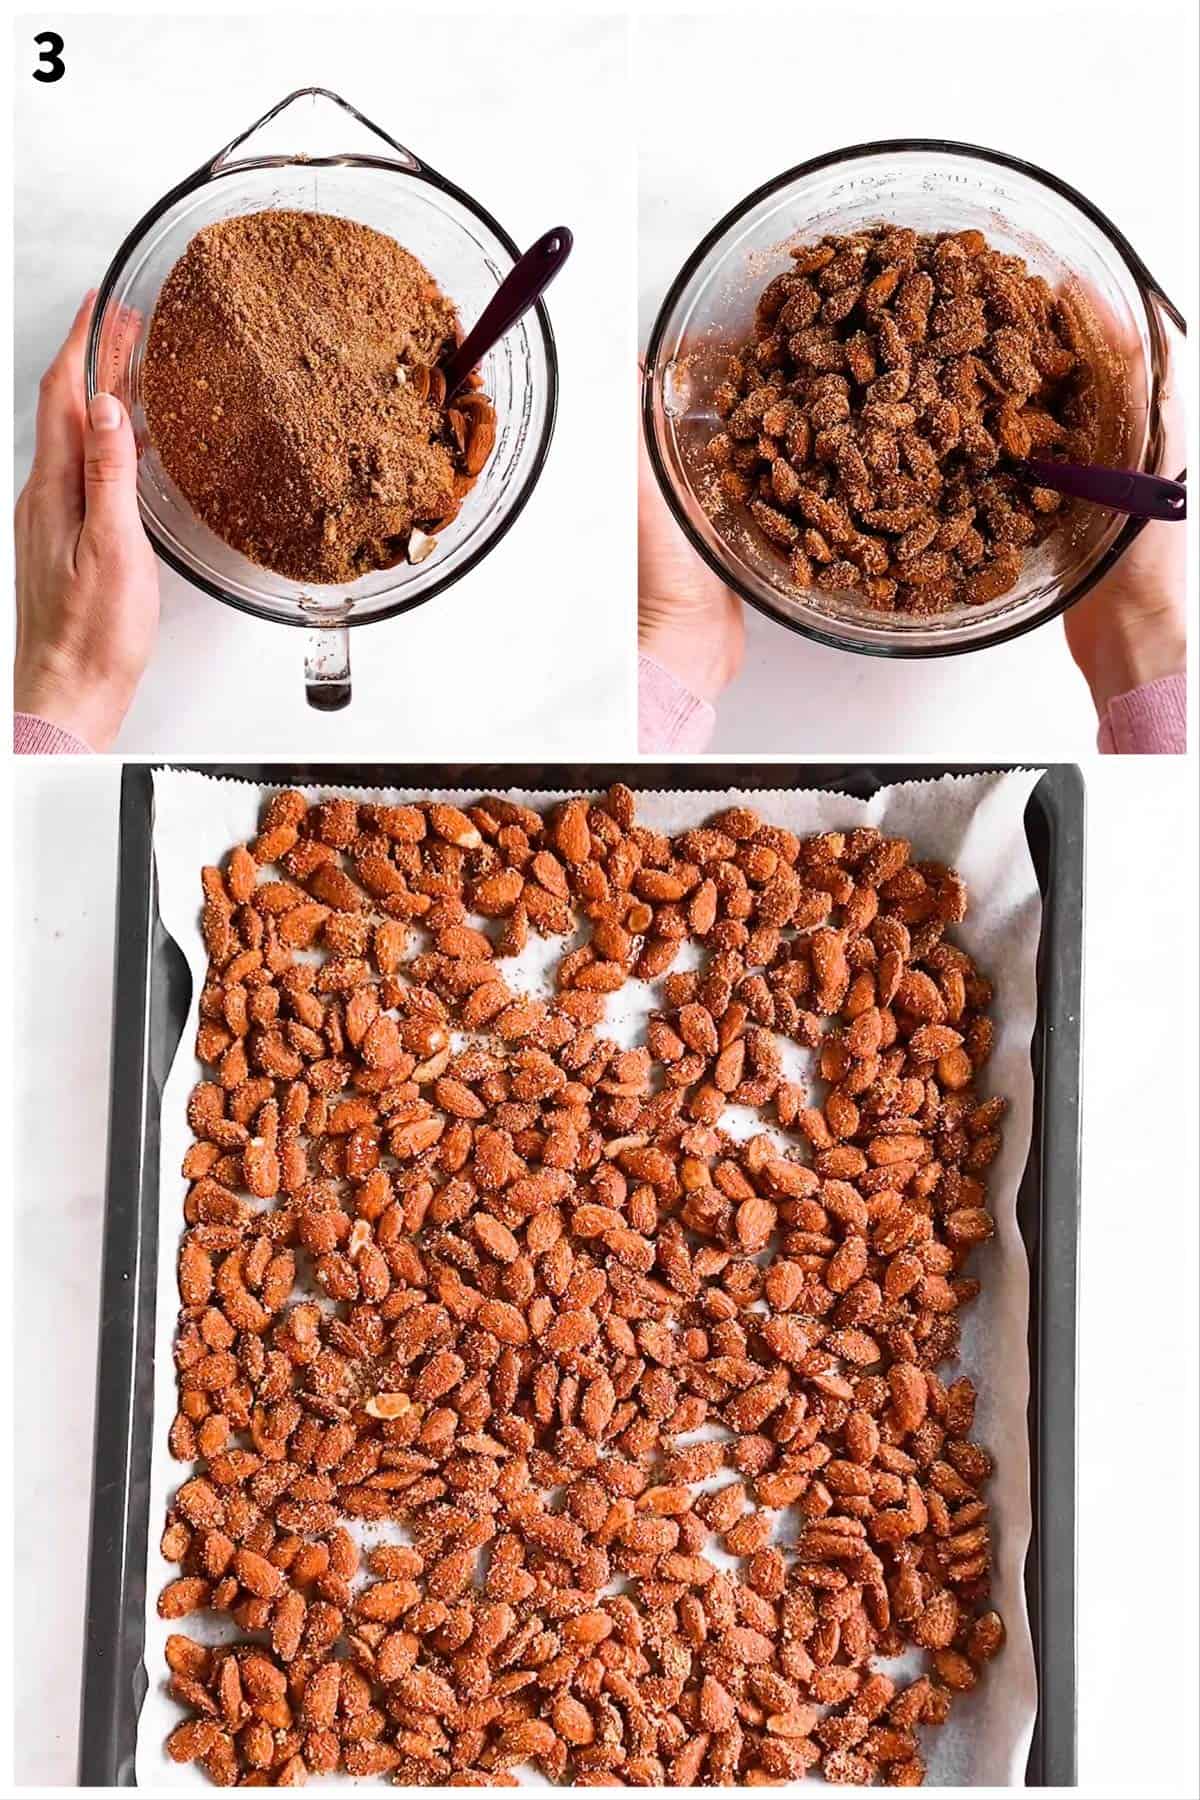 photo collage to show how to coat and bake nuts to make candied almonds